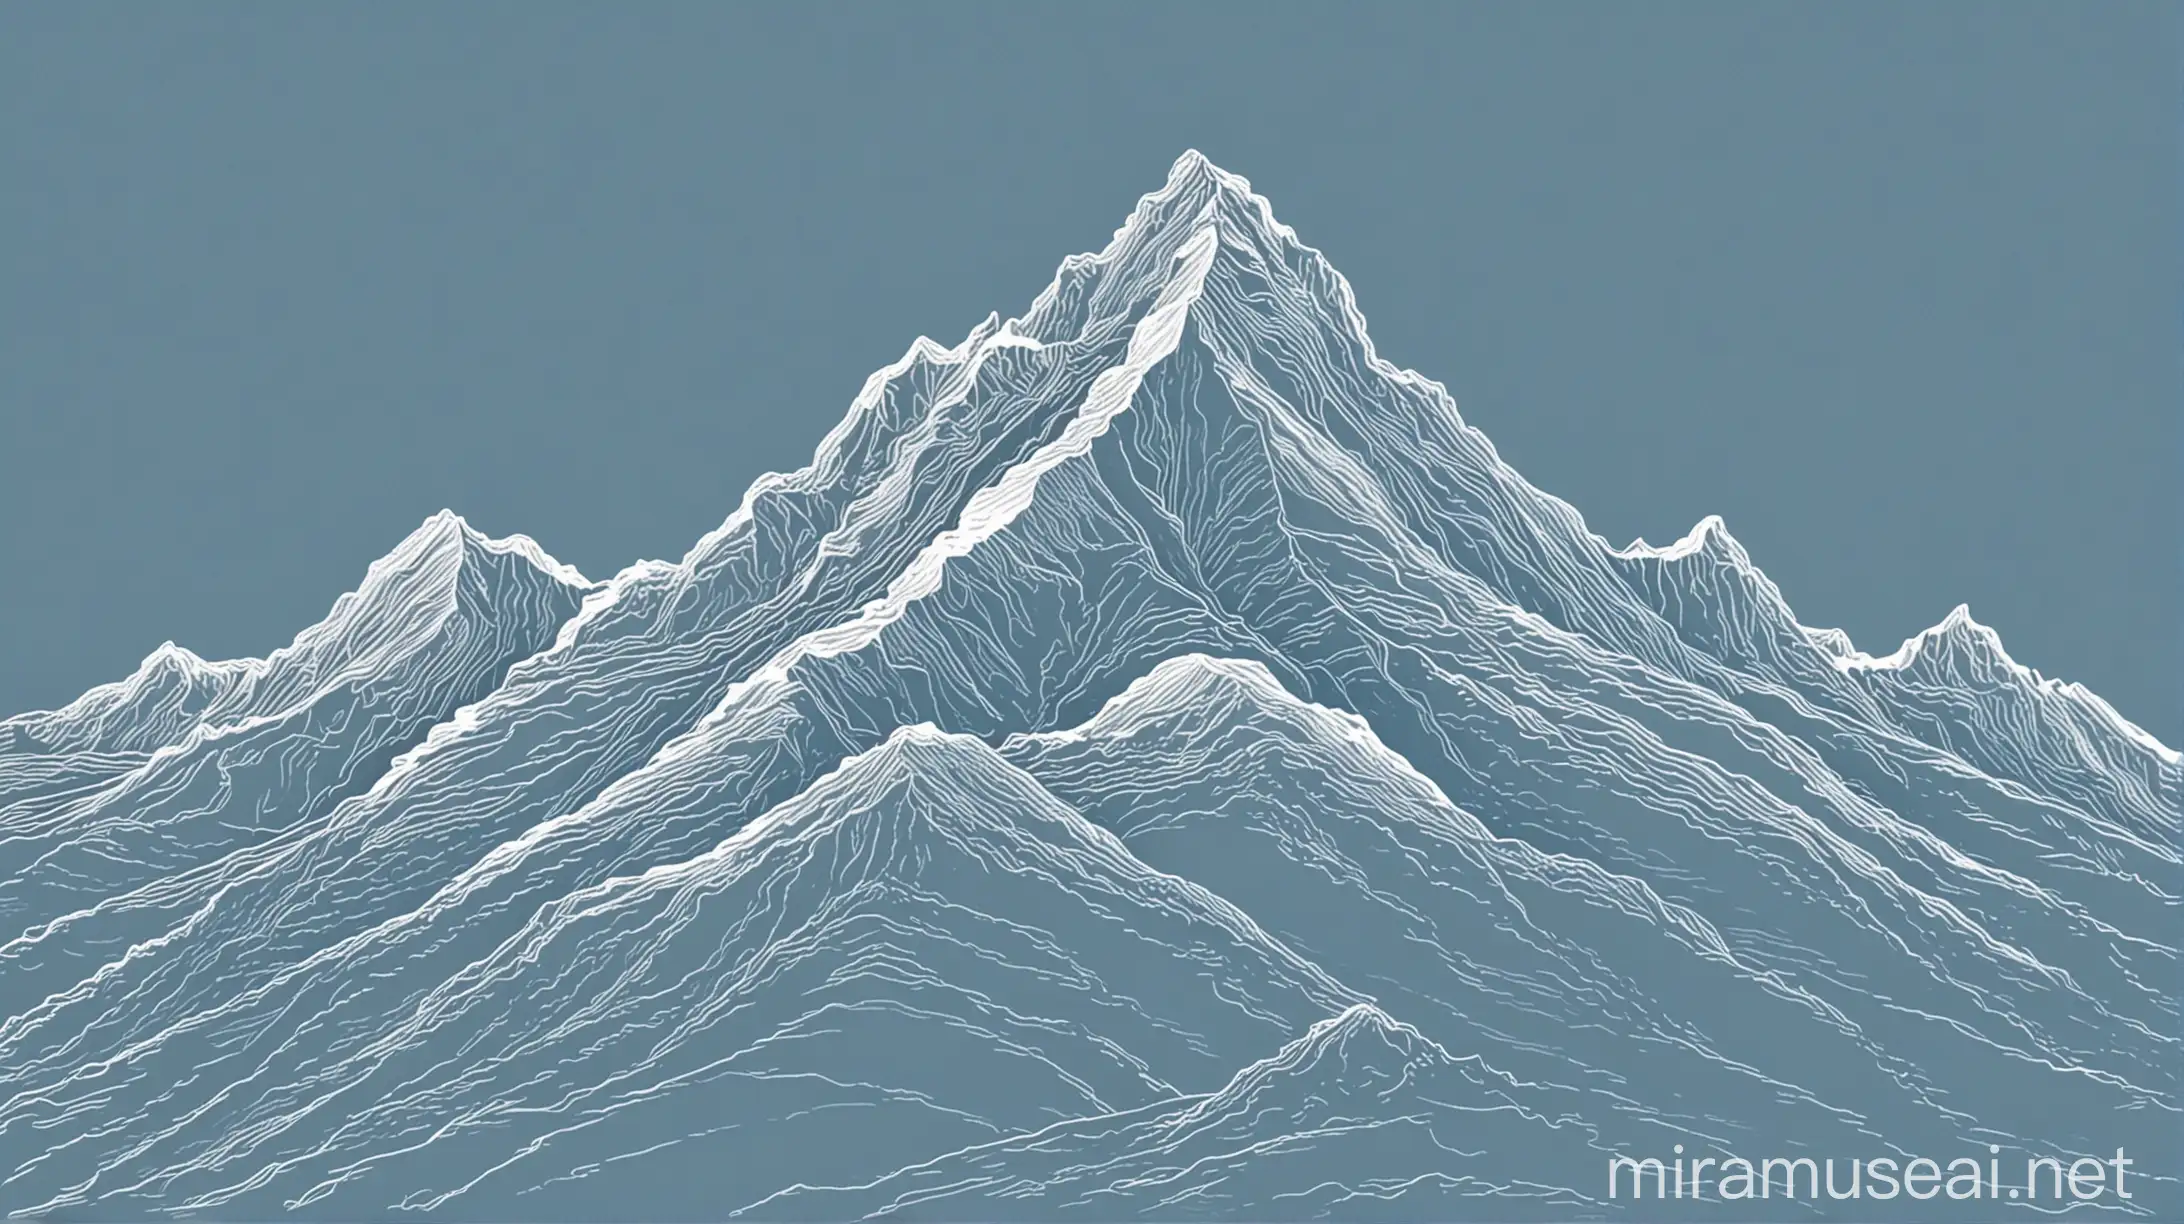 A very simple, blue minimalist mountain drawing with very evident large contour lines made with adobe illustrator. Just a few lines make the shape of the mountain. The prevalent colour should be #142331